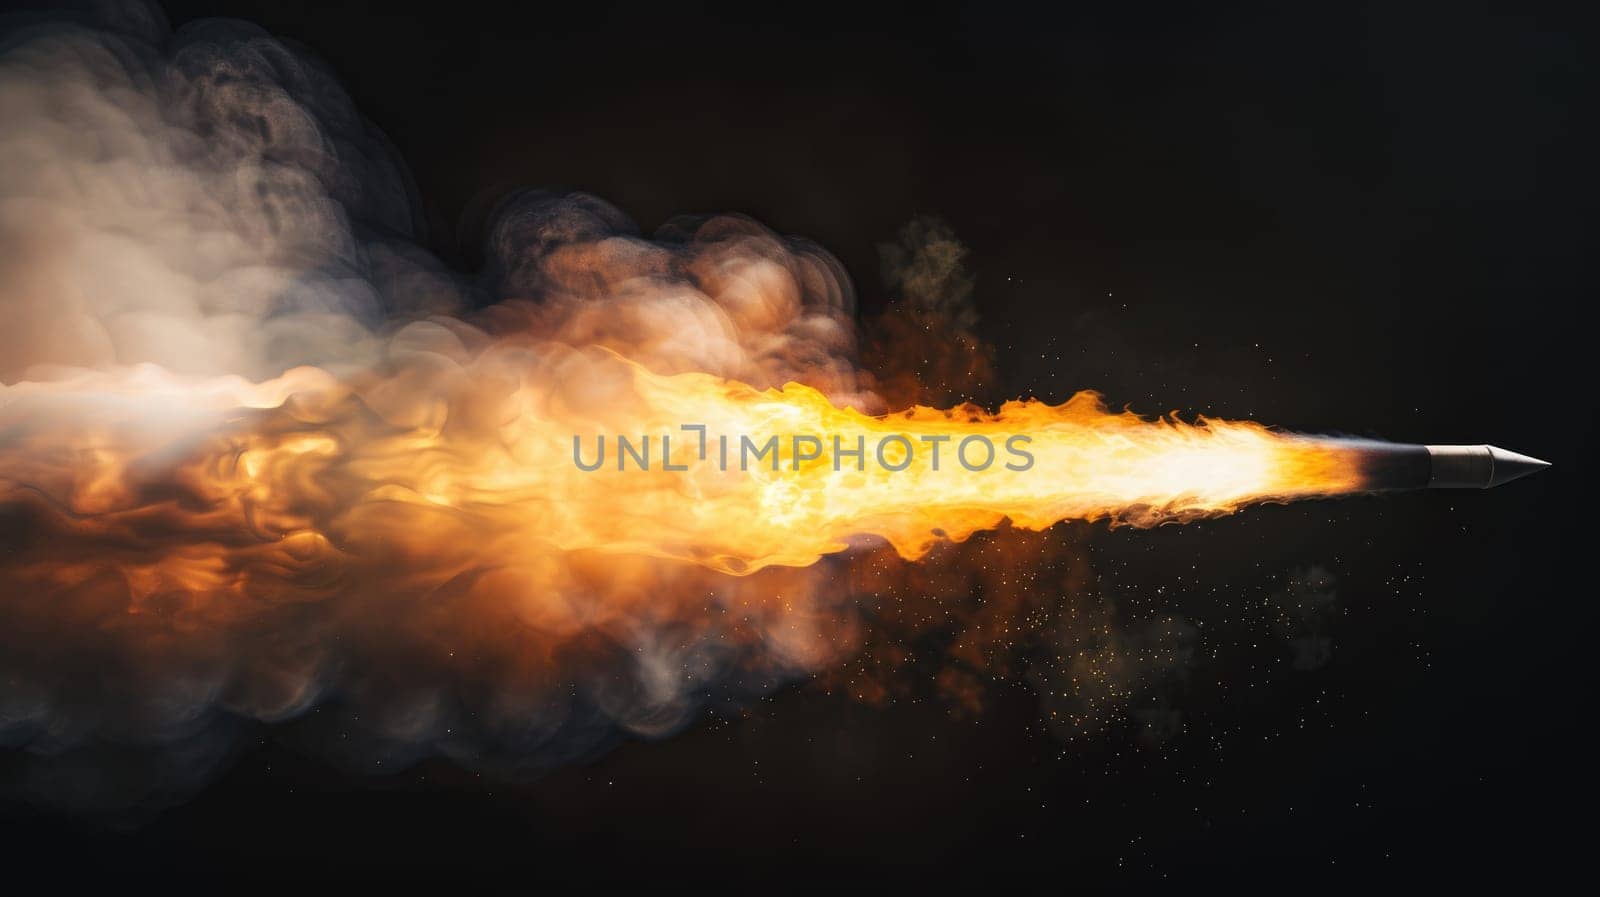 Fire and smoke from a rocket engine on a black background by nijieimu